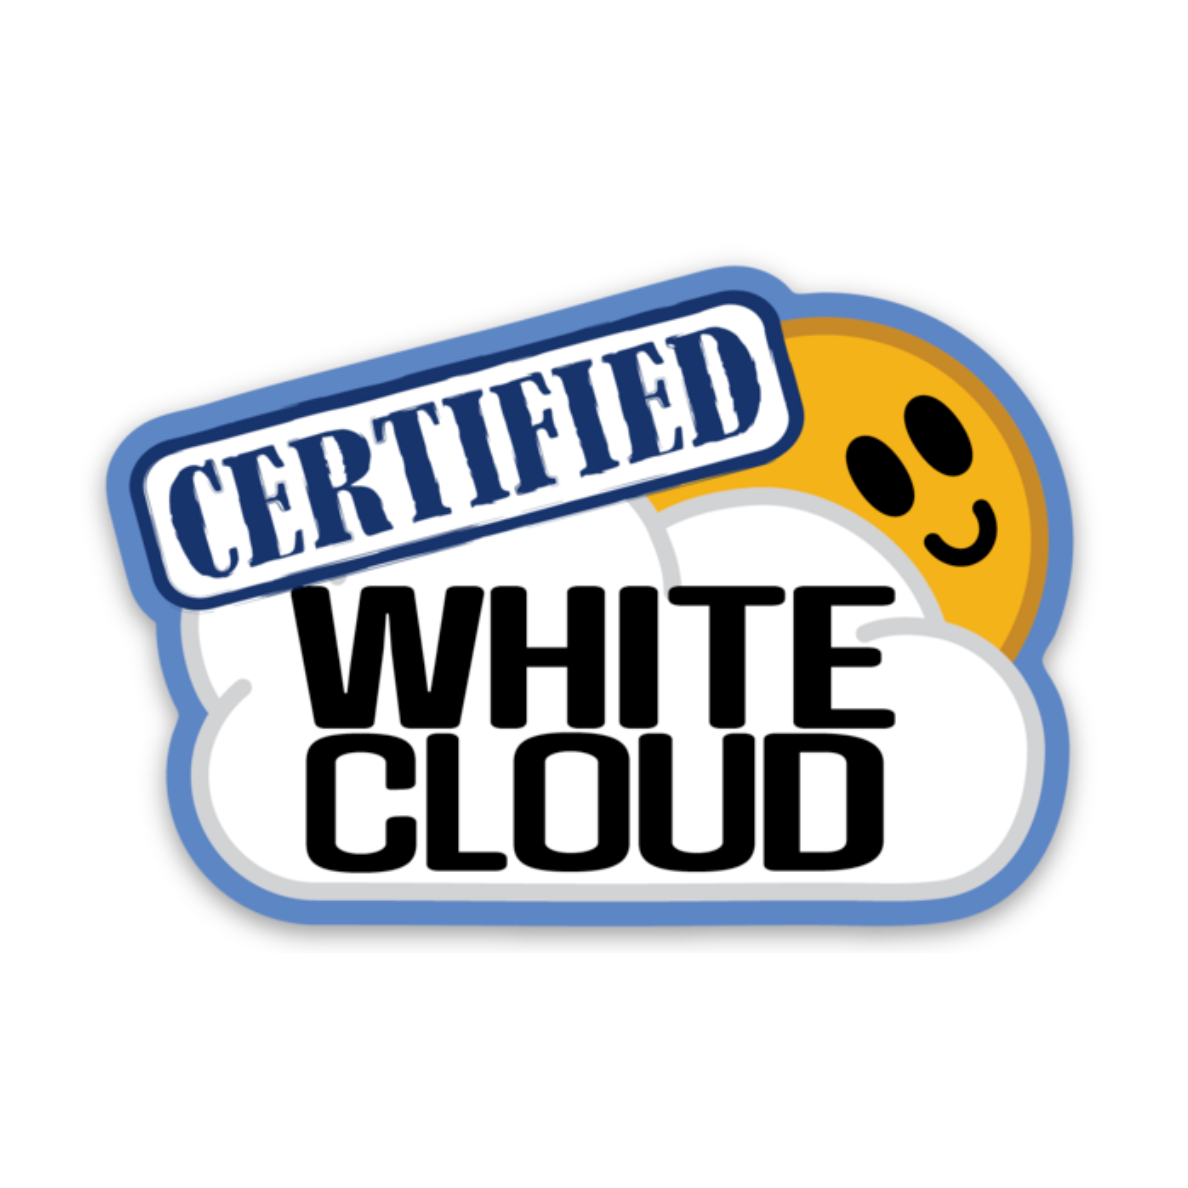 Certified White Cloud Decal